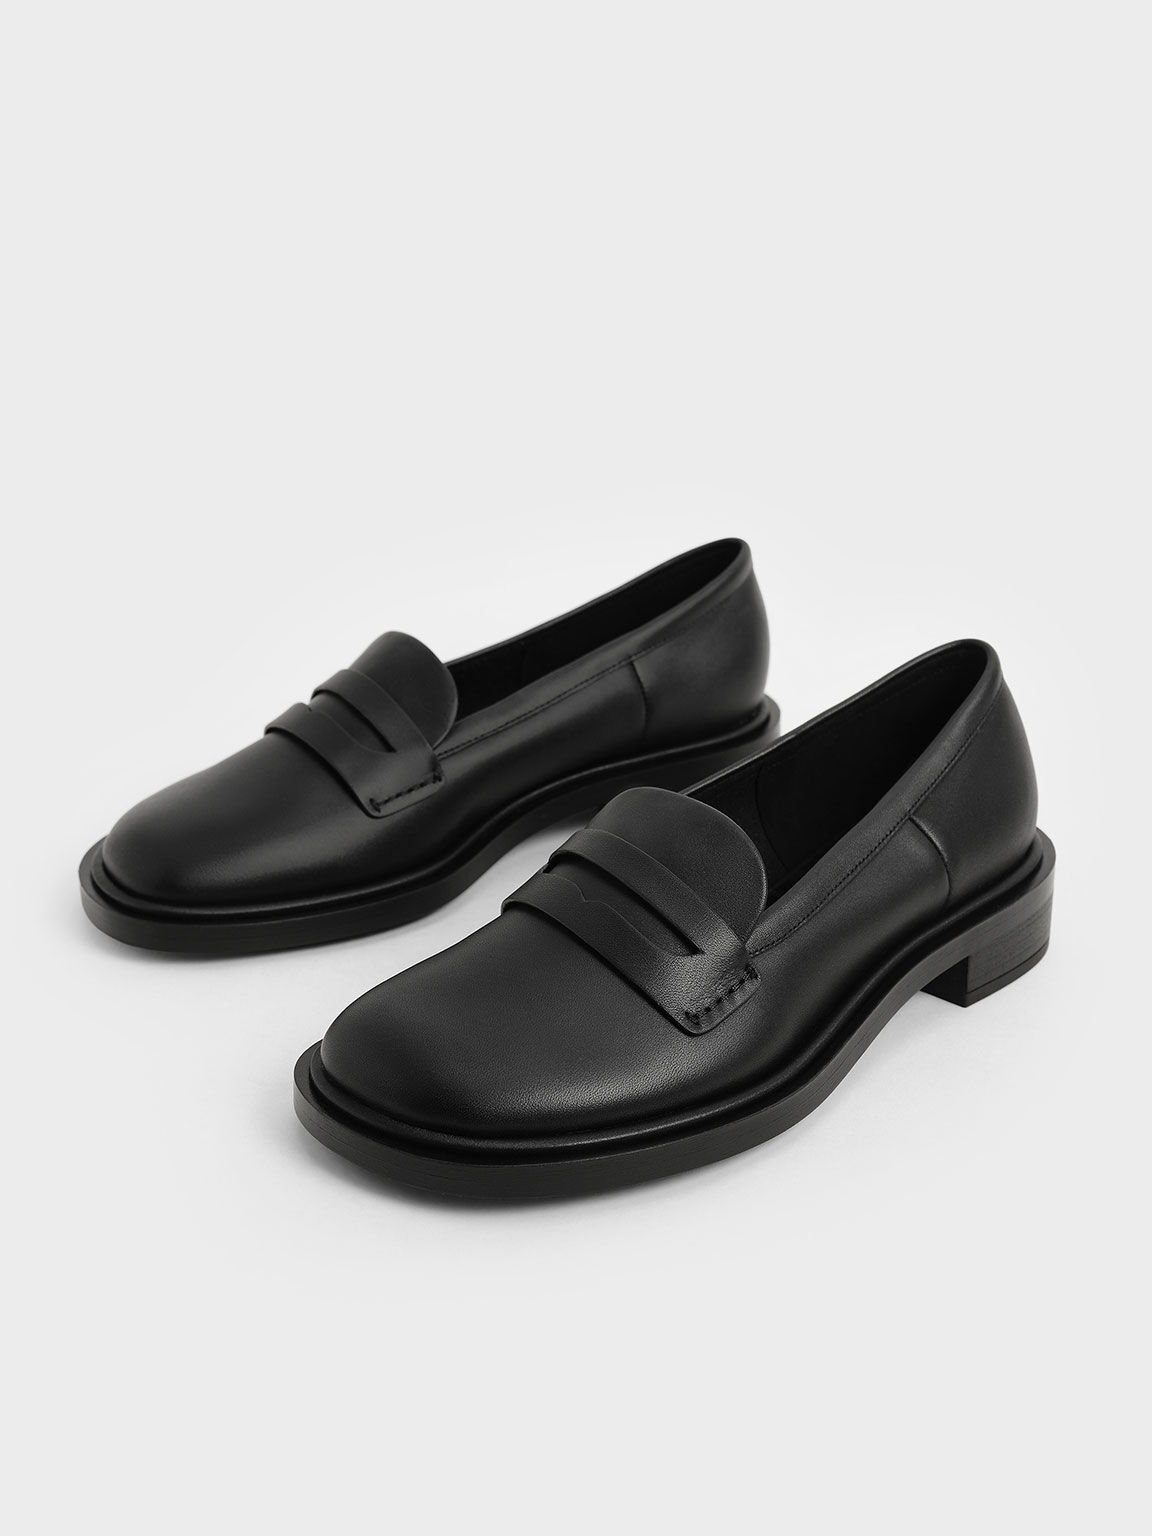 Rumi Leather Penny Loafers, Black, hi-res